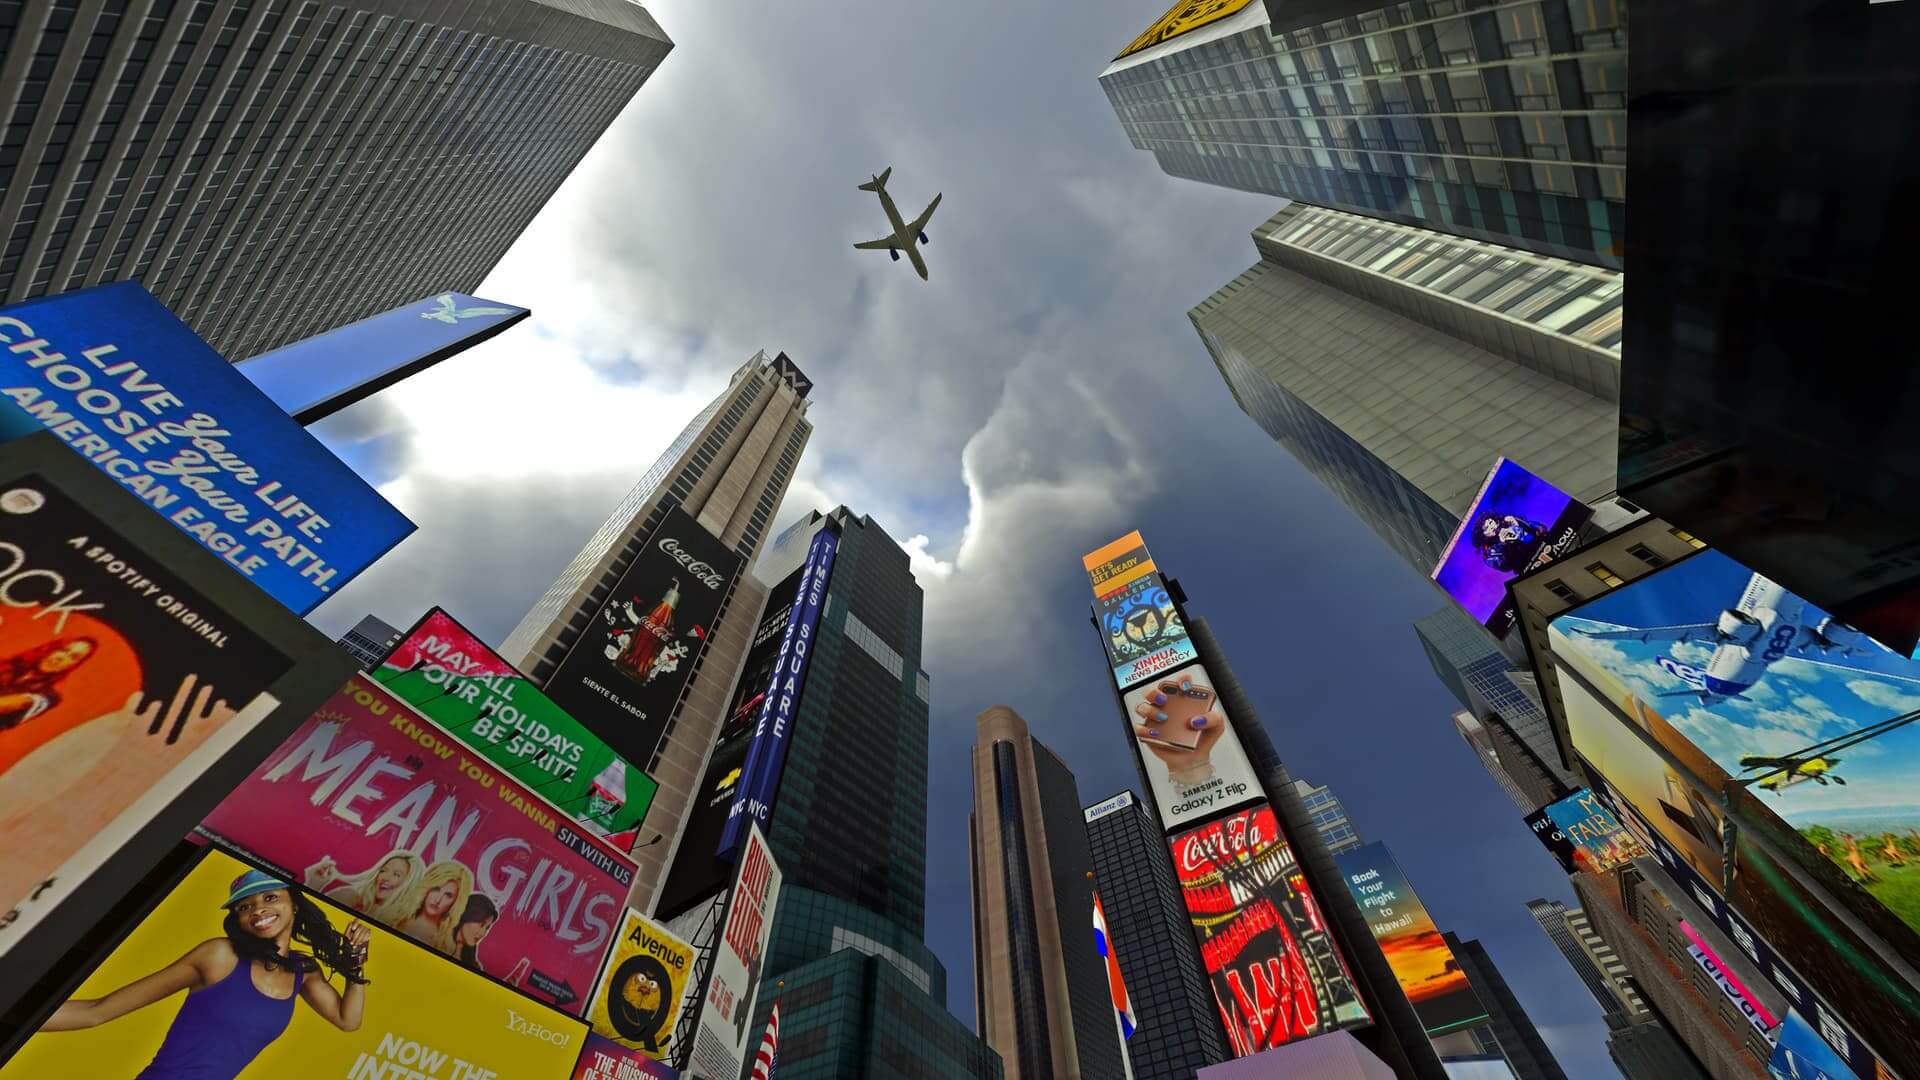 A bottom-up view of an airliner flying over Times Square in New York. Many brightly colored billboards on the sides of buildings are visible.